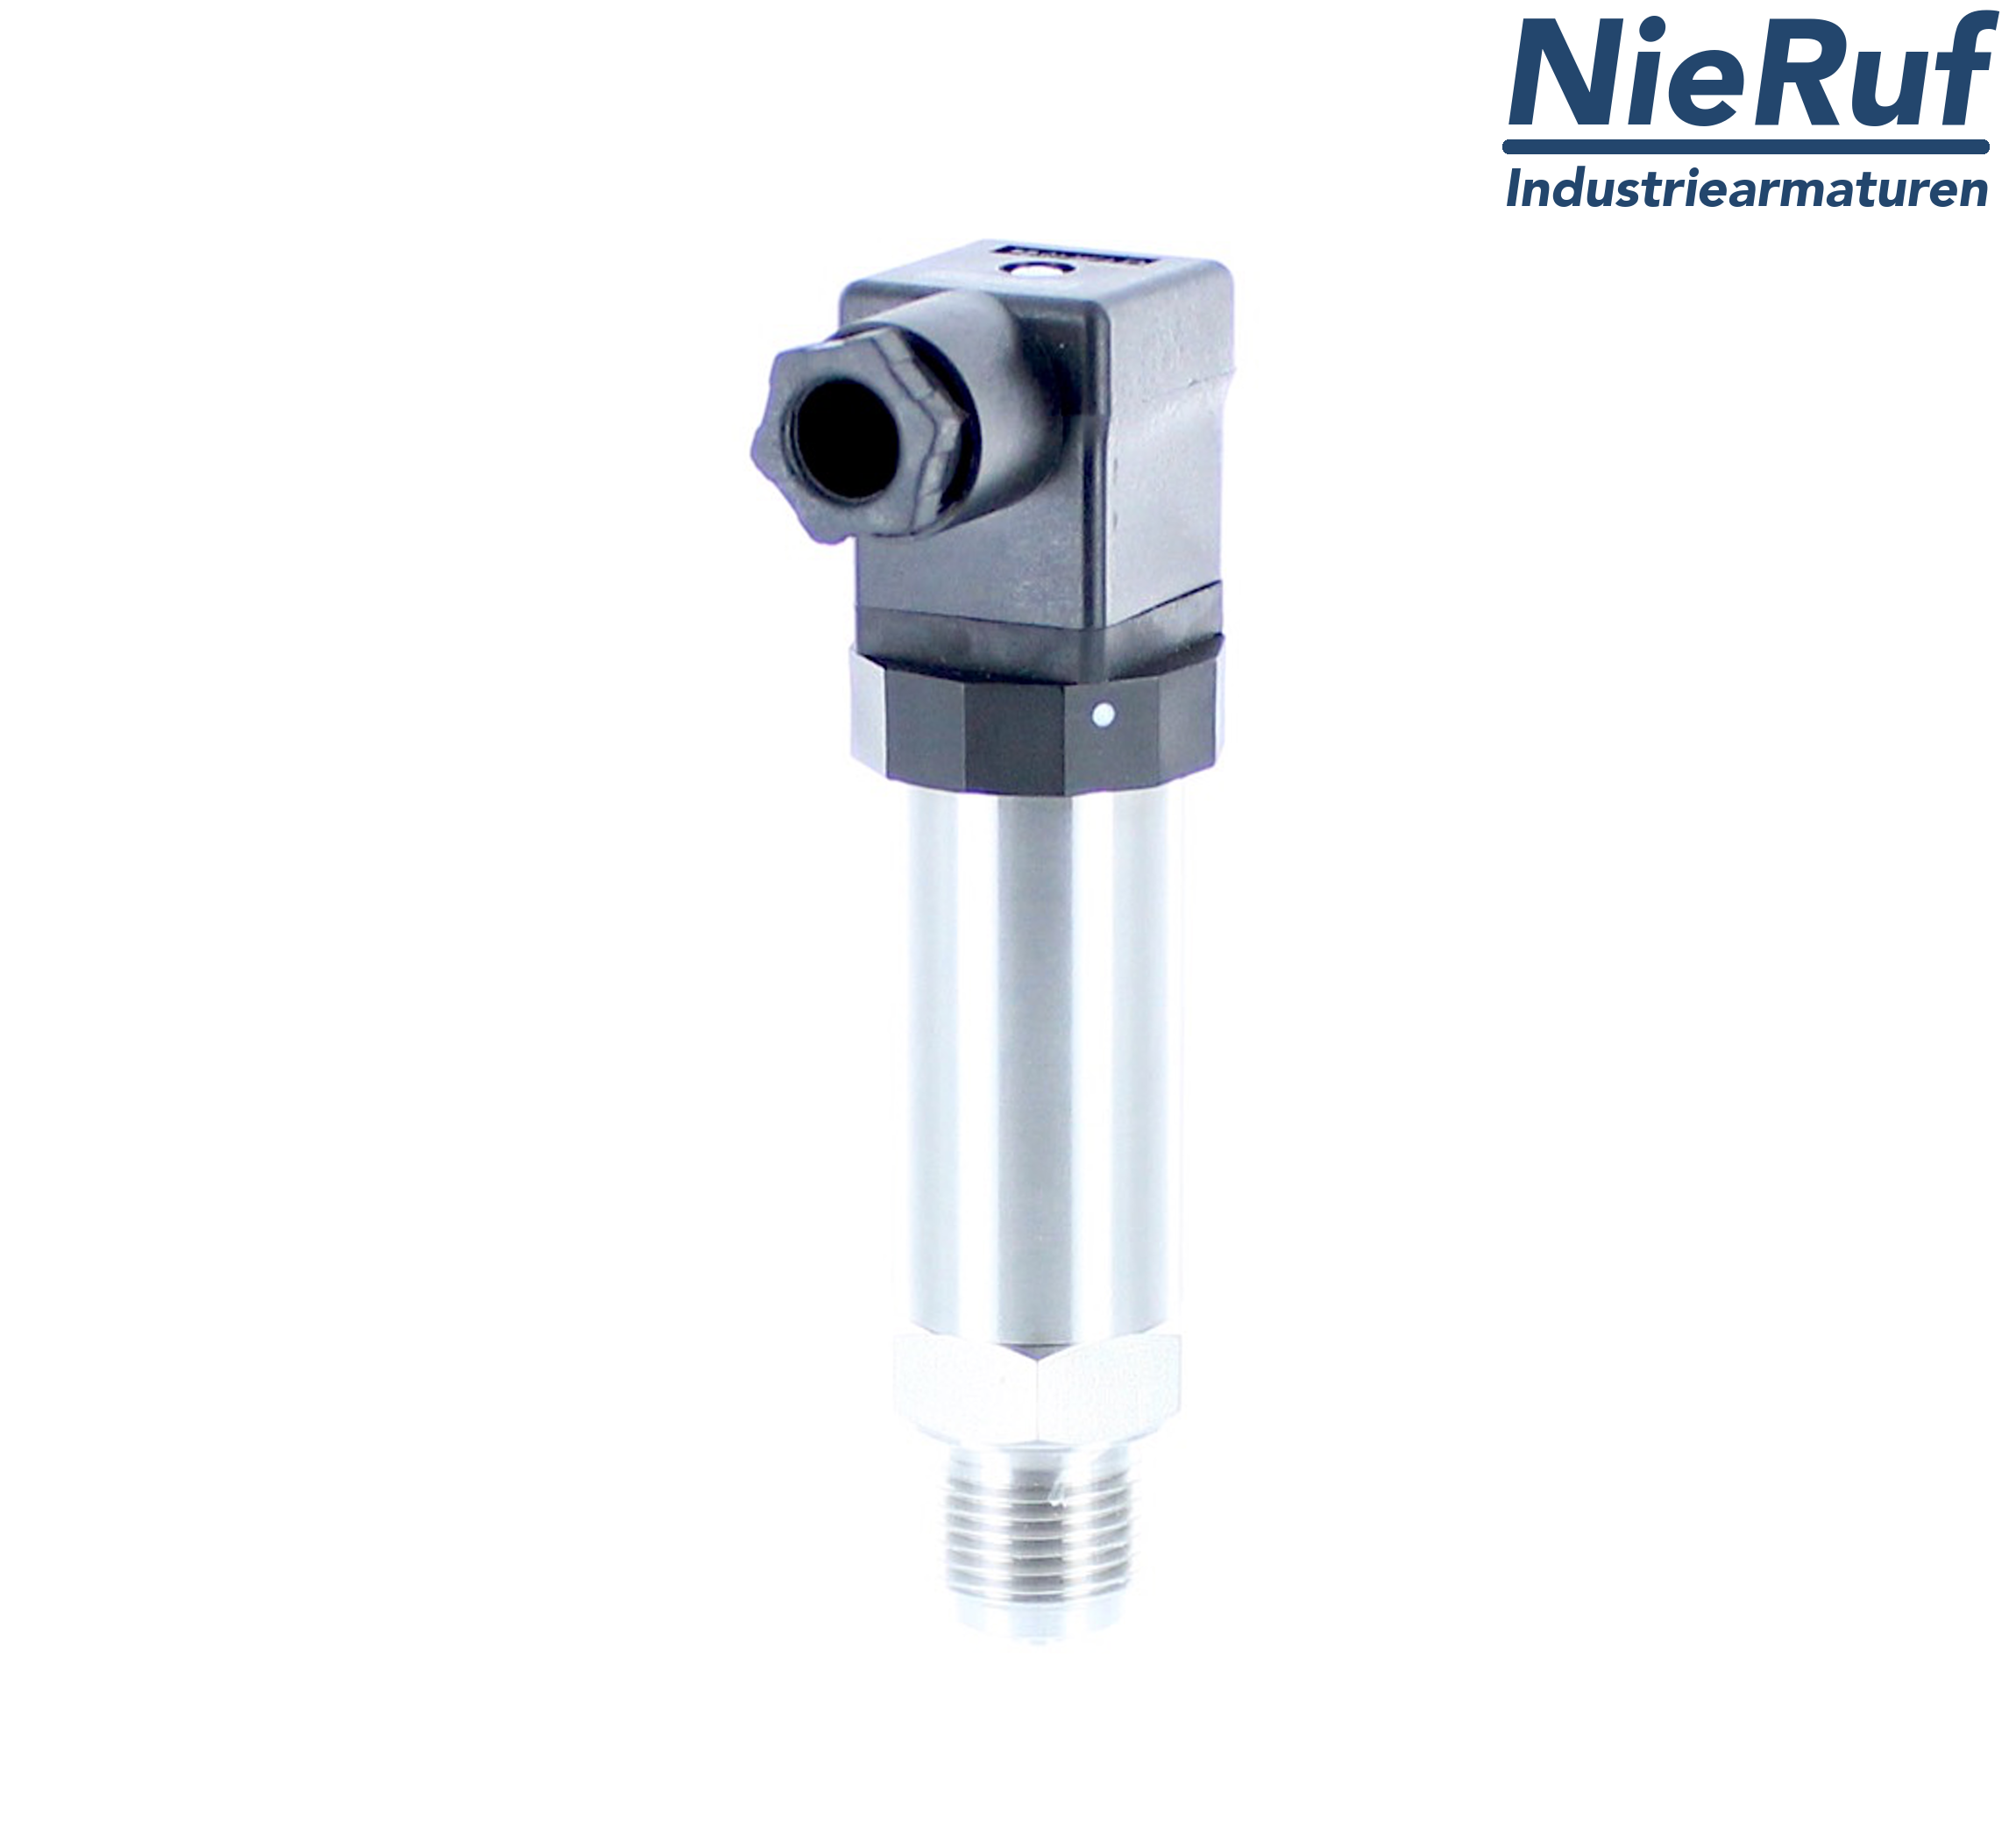 pressure sensor G 1/2" B DS01 stainless steel 2-wire: 4-20mA FPM 0,0 - 60,0 bar